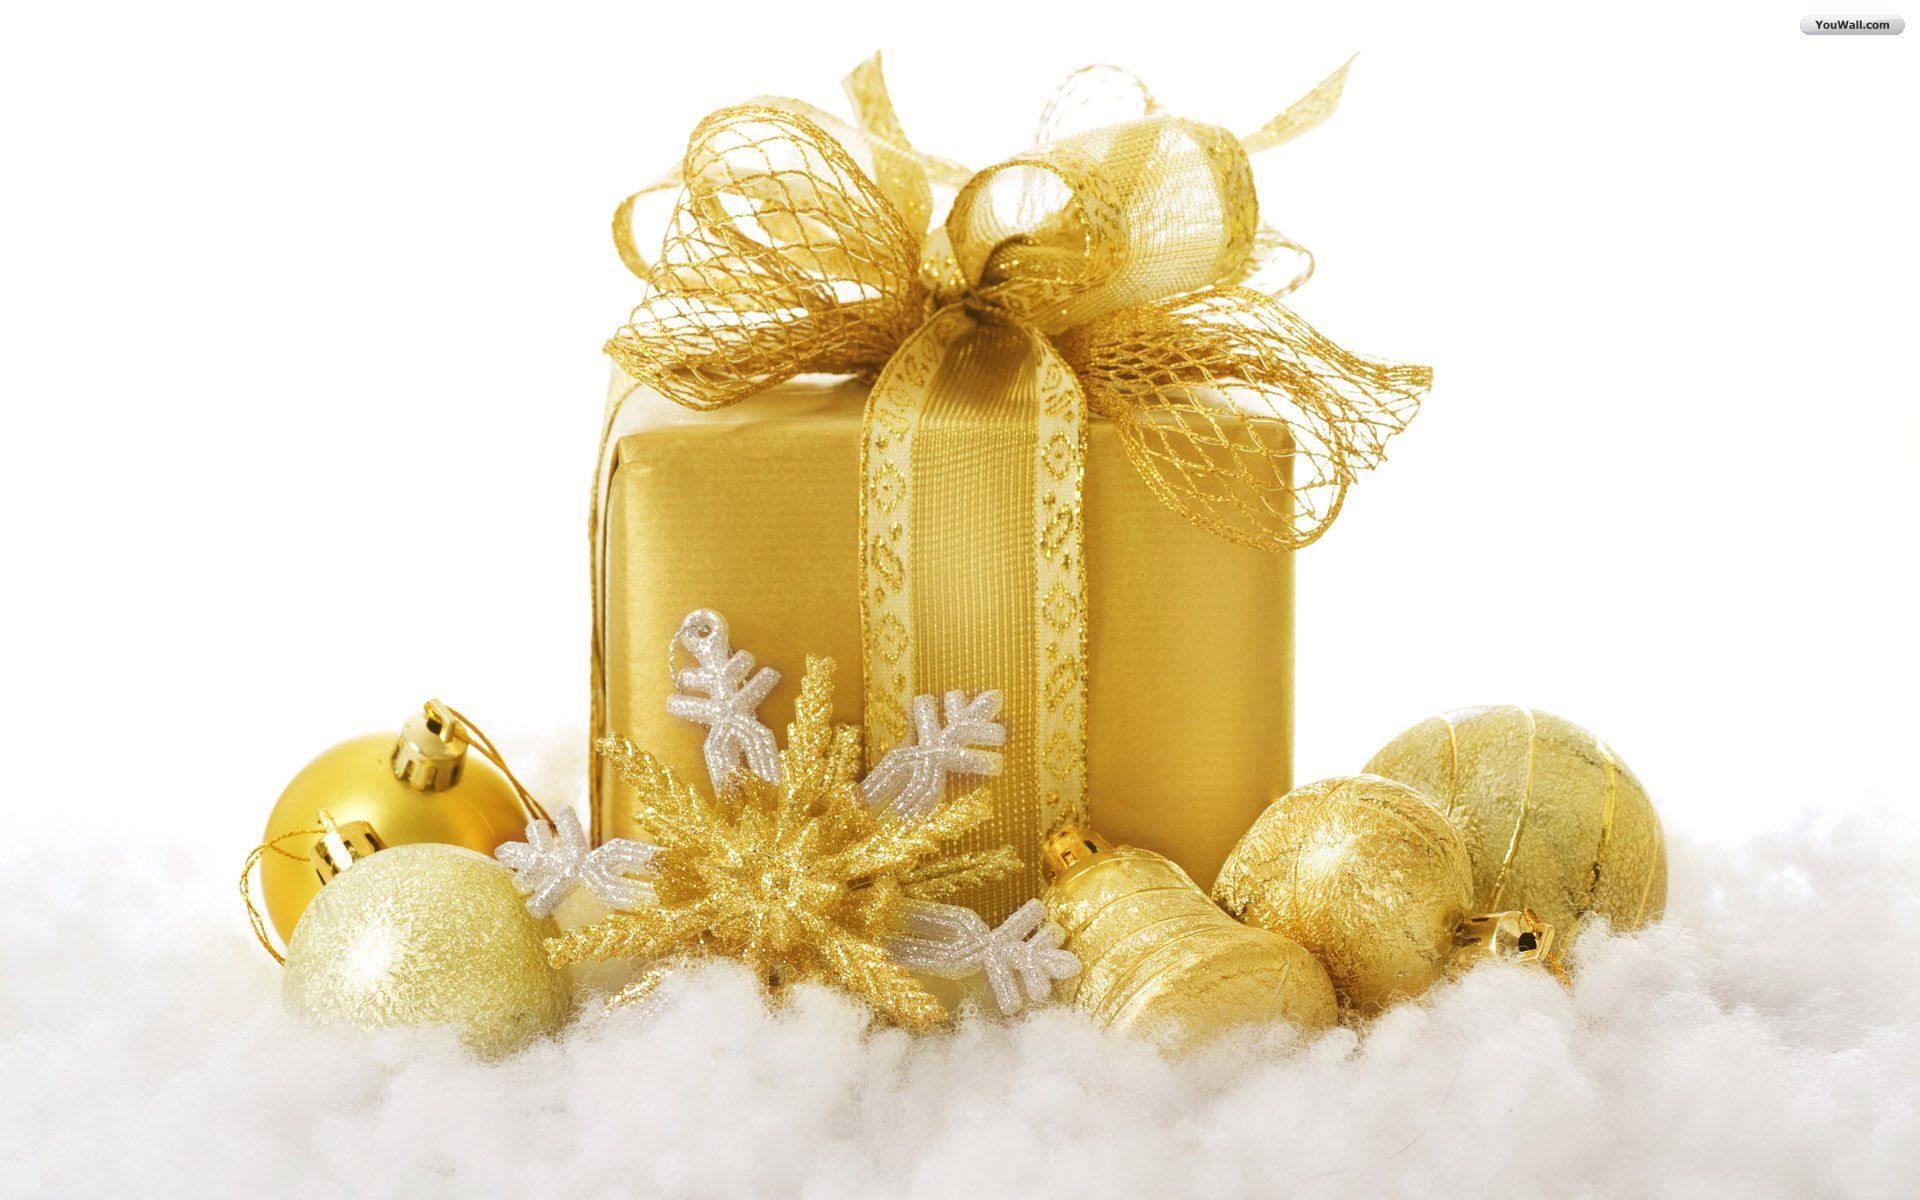 Golden Gift Wallpaper - Christian Wallpapers and Backgrounds